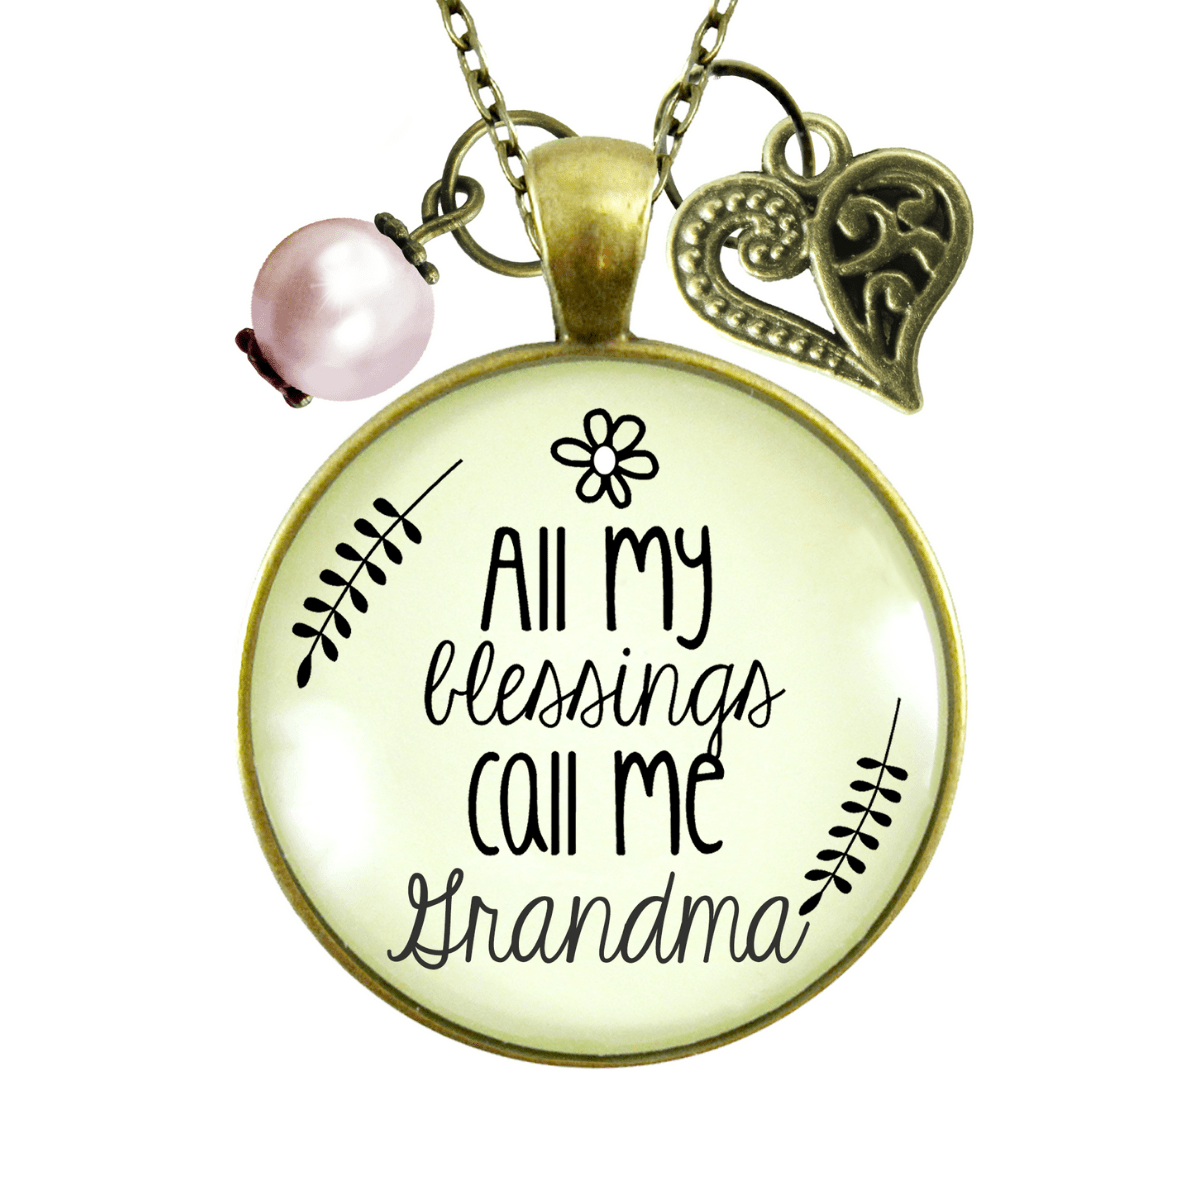 Gutsy Goodness Grandma Necklace All My Blessings Grandmother Womens Family Gift Jewelry - Gutsy Goodness;Grandma Necklace All My Blessings Grandmother Womens Family Gift Jewelry - Gutsy Goodness Handmade Jewelry Gifts